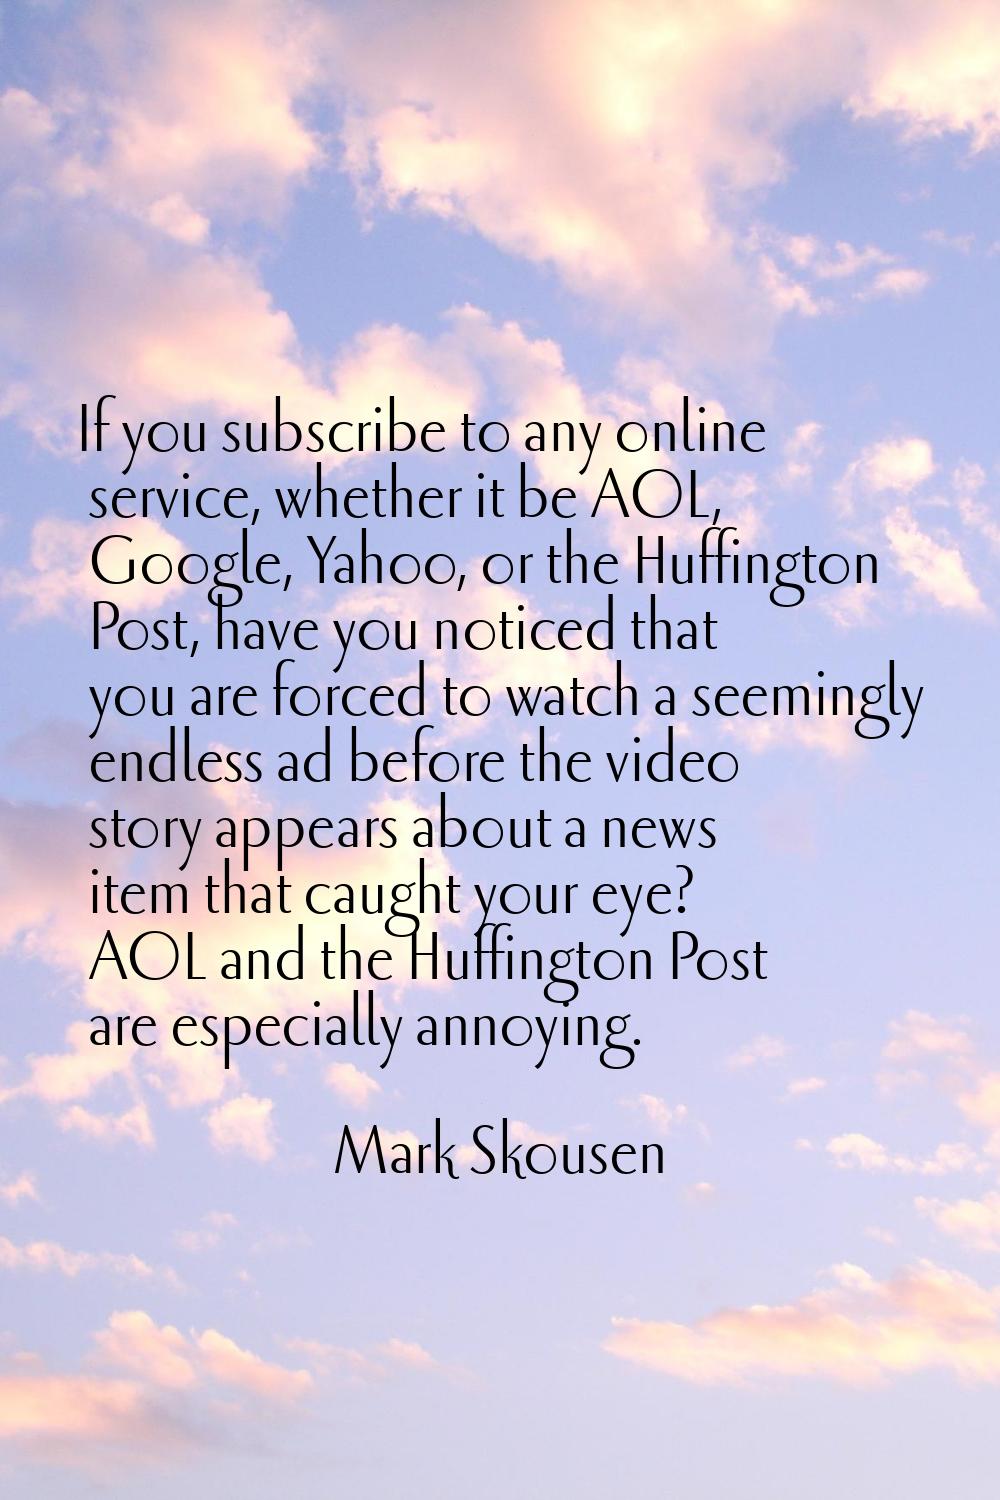 If you subscribe to any online service, whether it be AOL, Google, Yahoo, or the Huffington Post, h